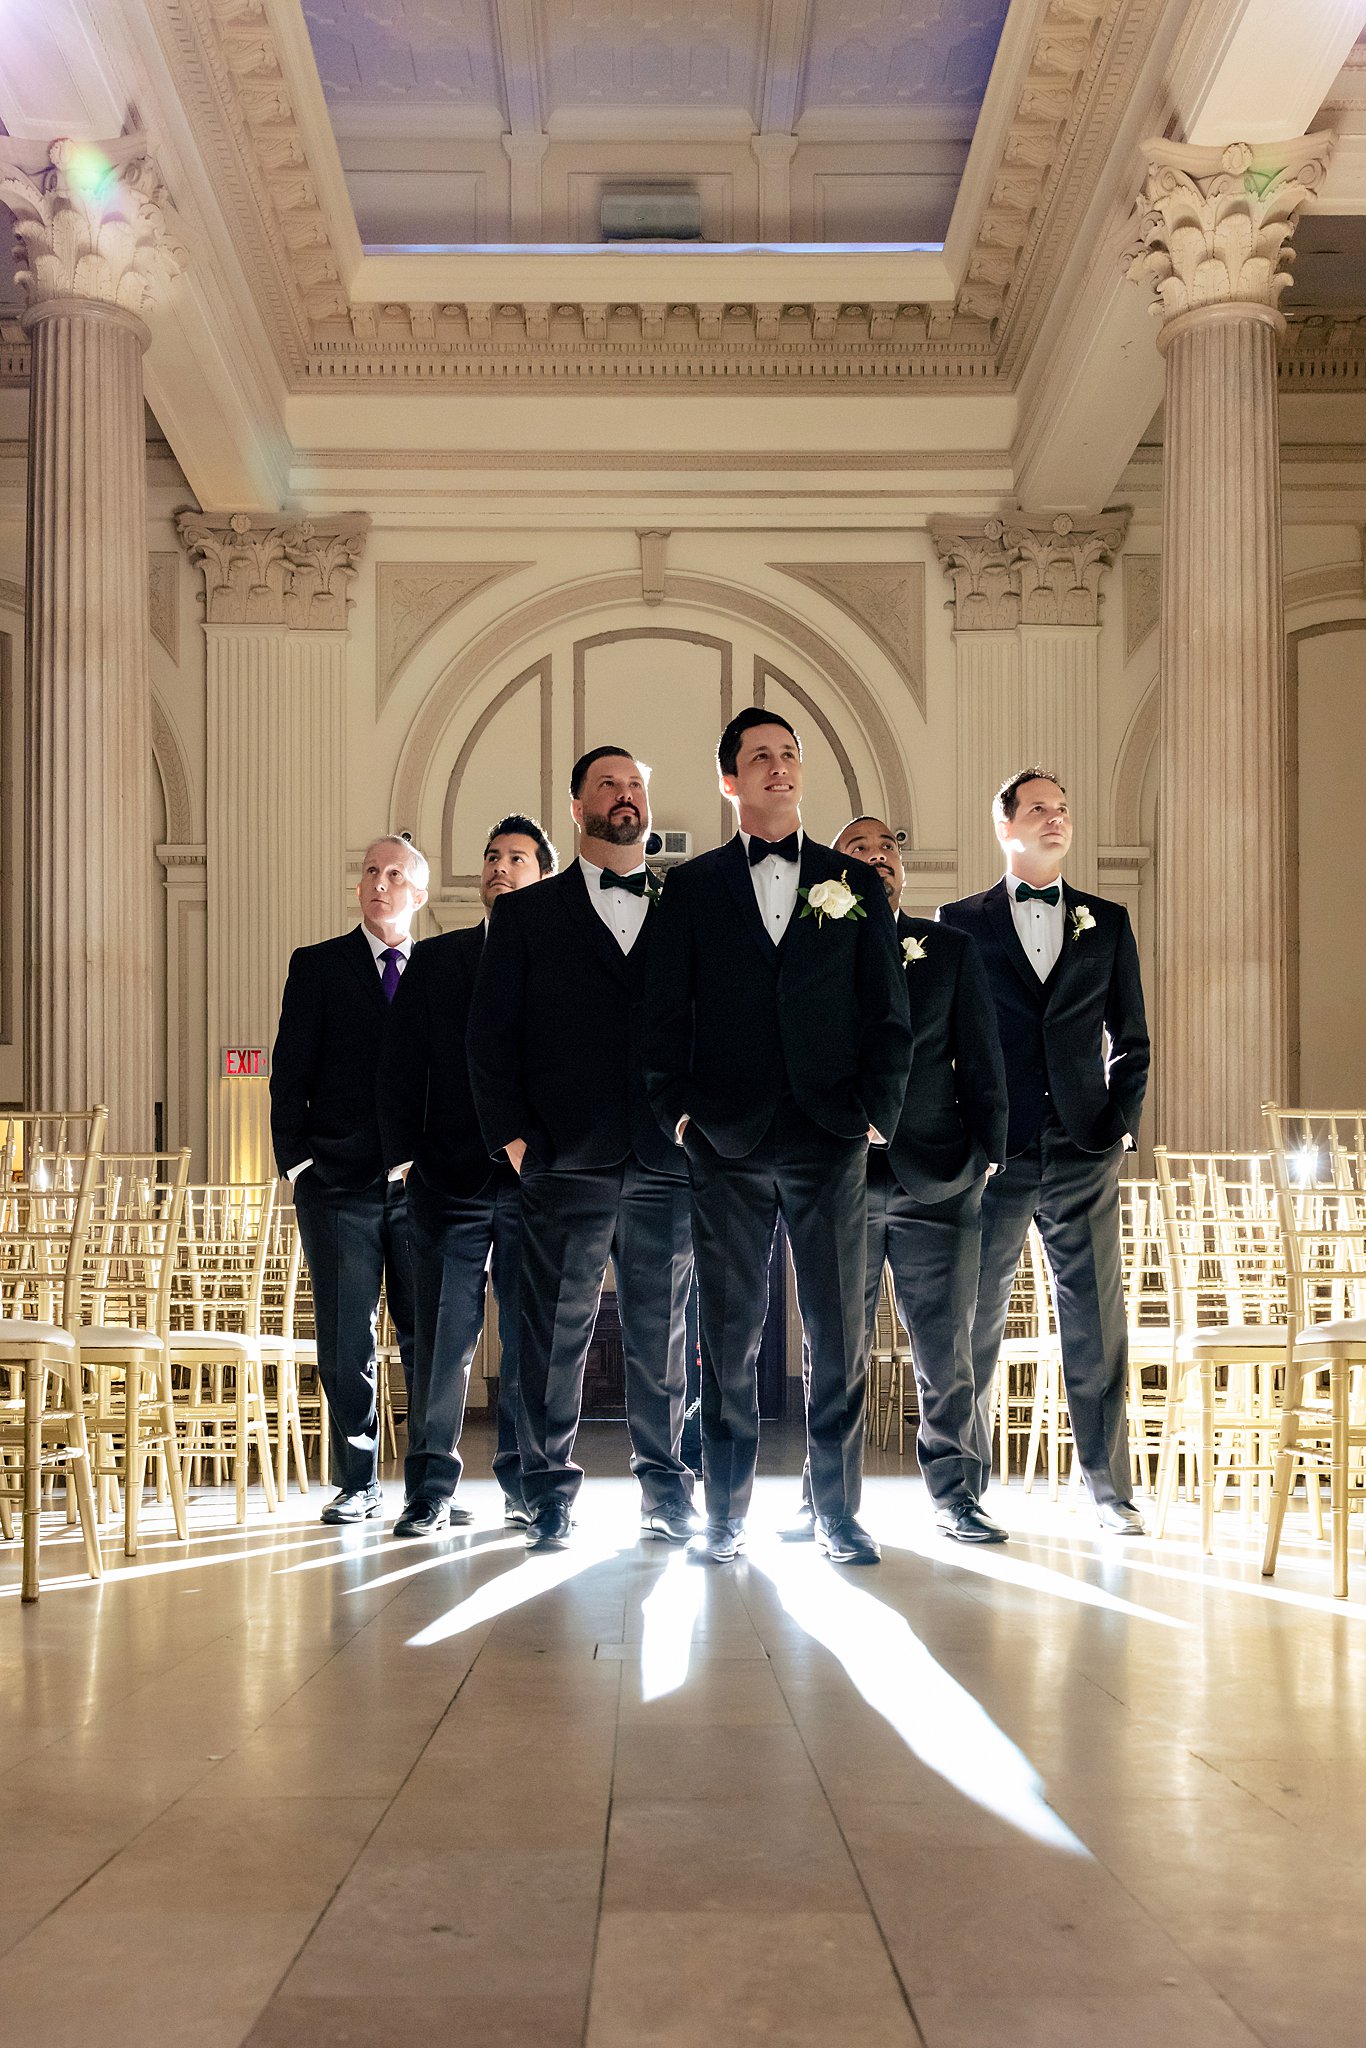 A groom and his 5 groomsmen stand in an ornate wedding ceremony hall with hands in pockets